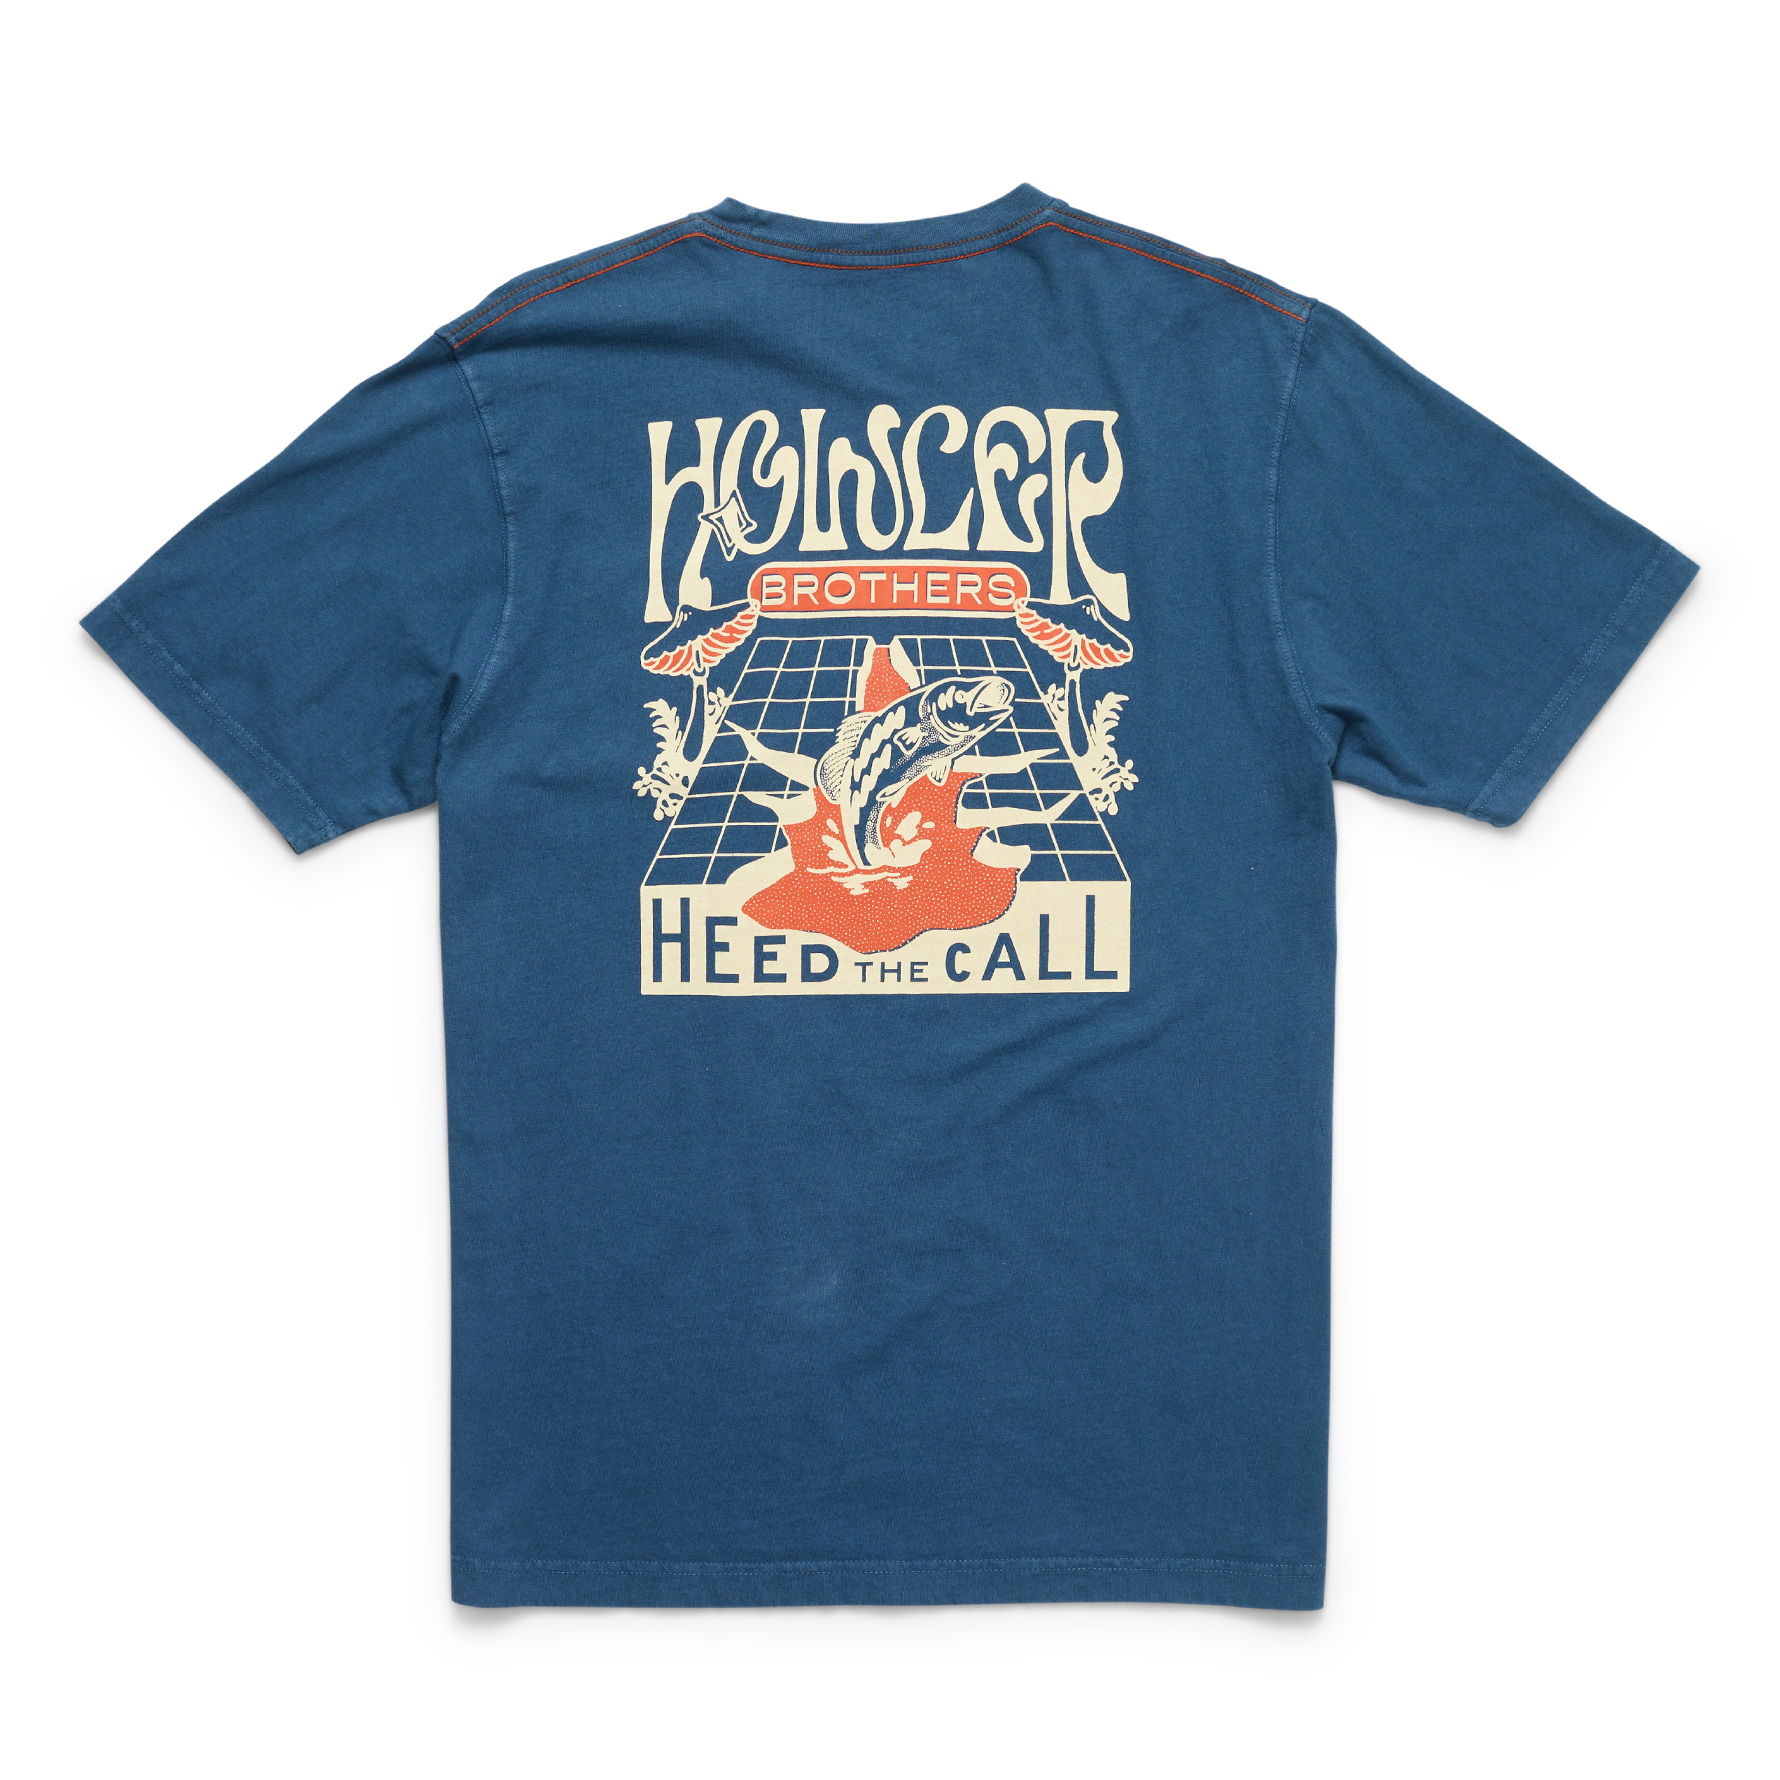 Howler Brothers Cotton Pocket T-Shirt